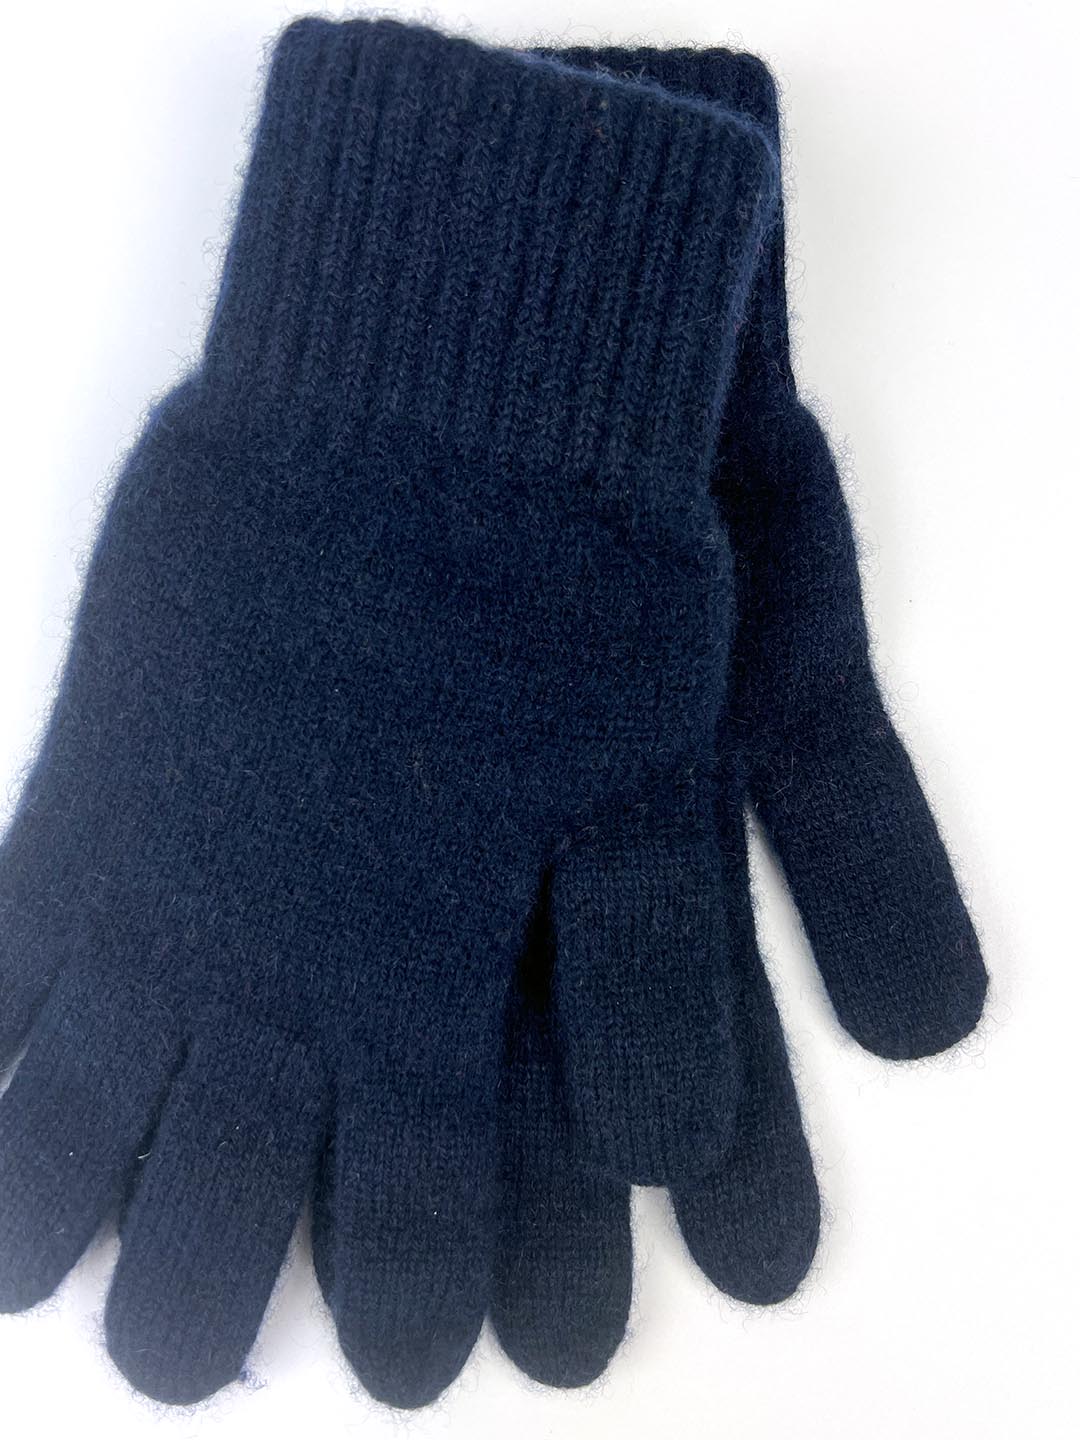 Cashmere gloves in blue shades. Knitted in the Scottish borders